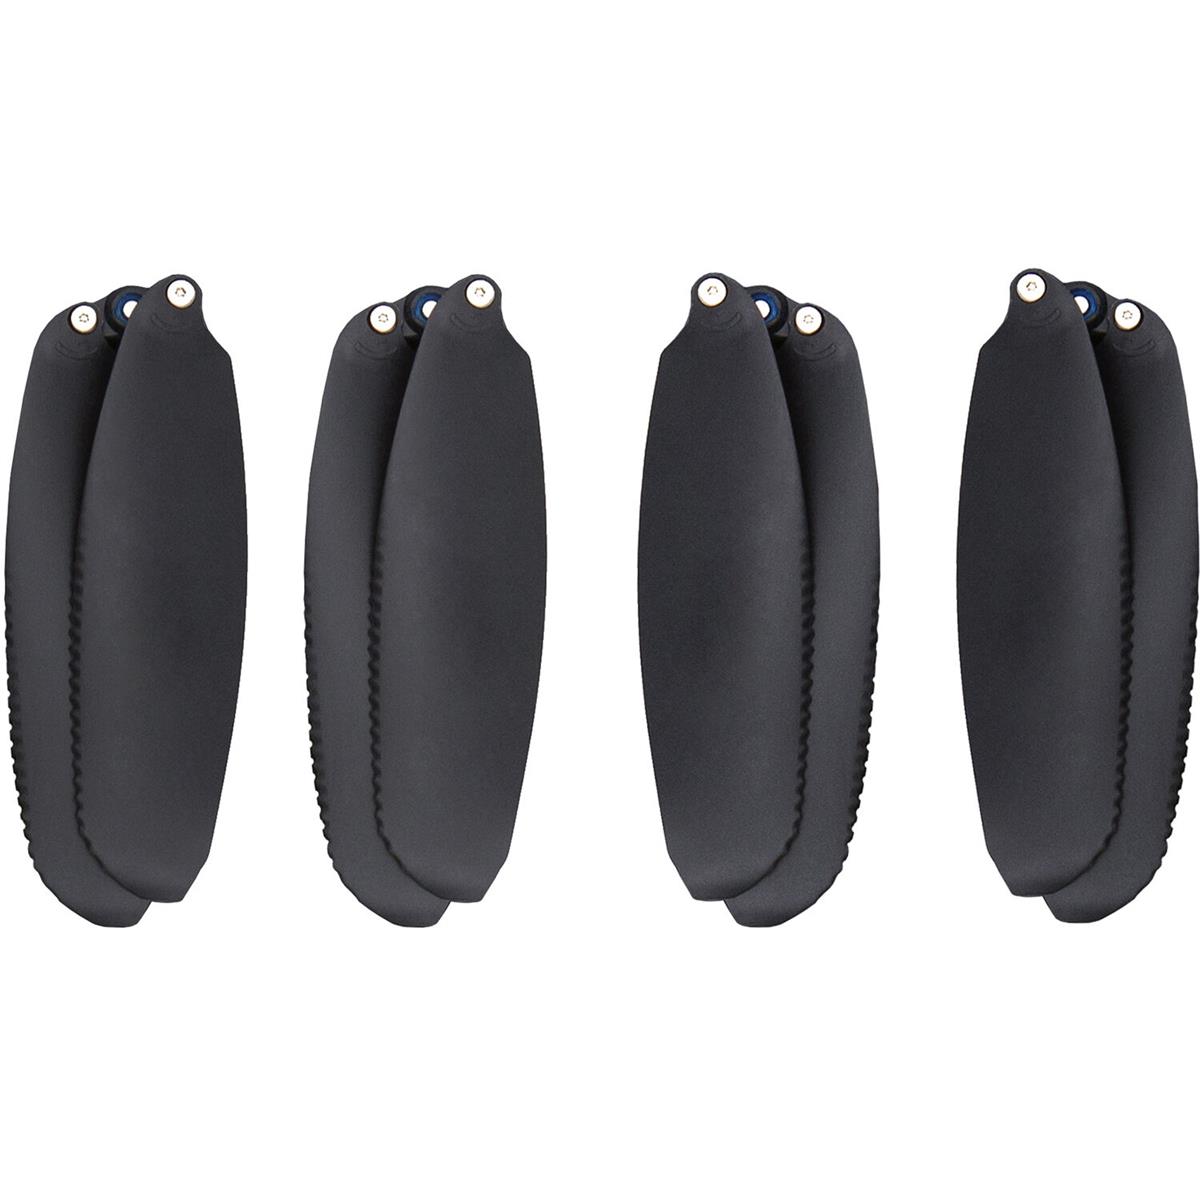 Image of Parrot Propellers for ANAFI USA Drone